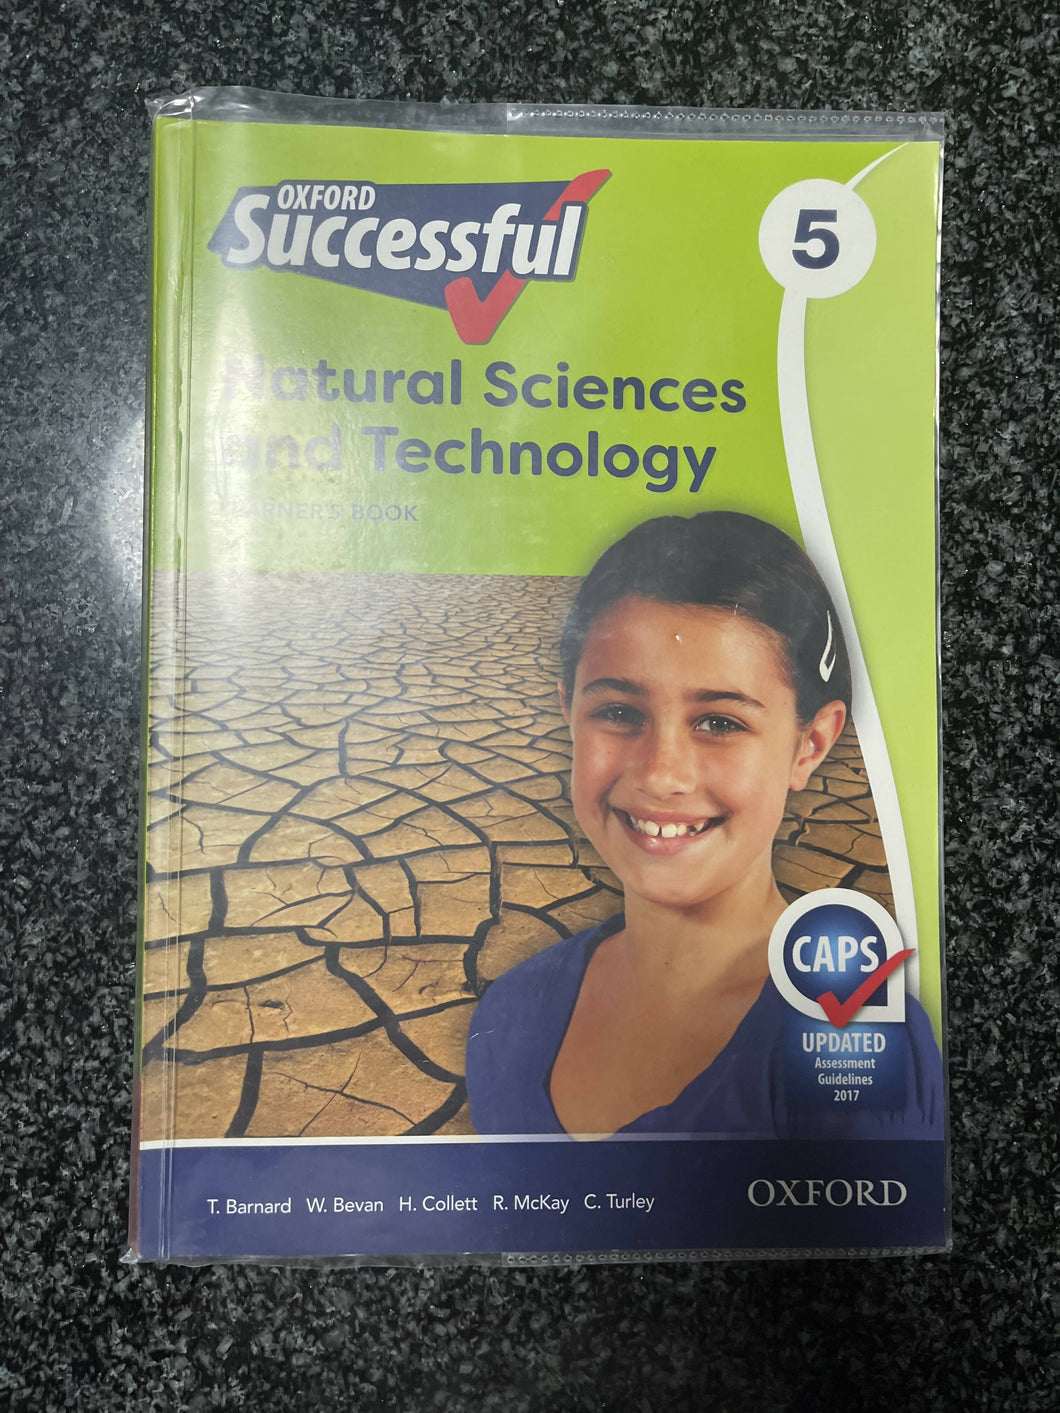 Oxford successfull natural science and technology learners book